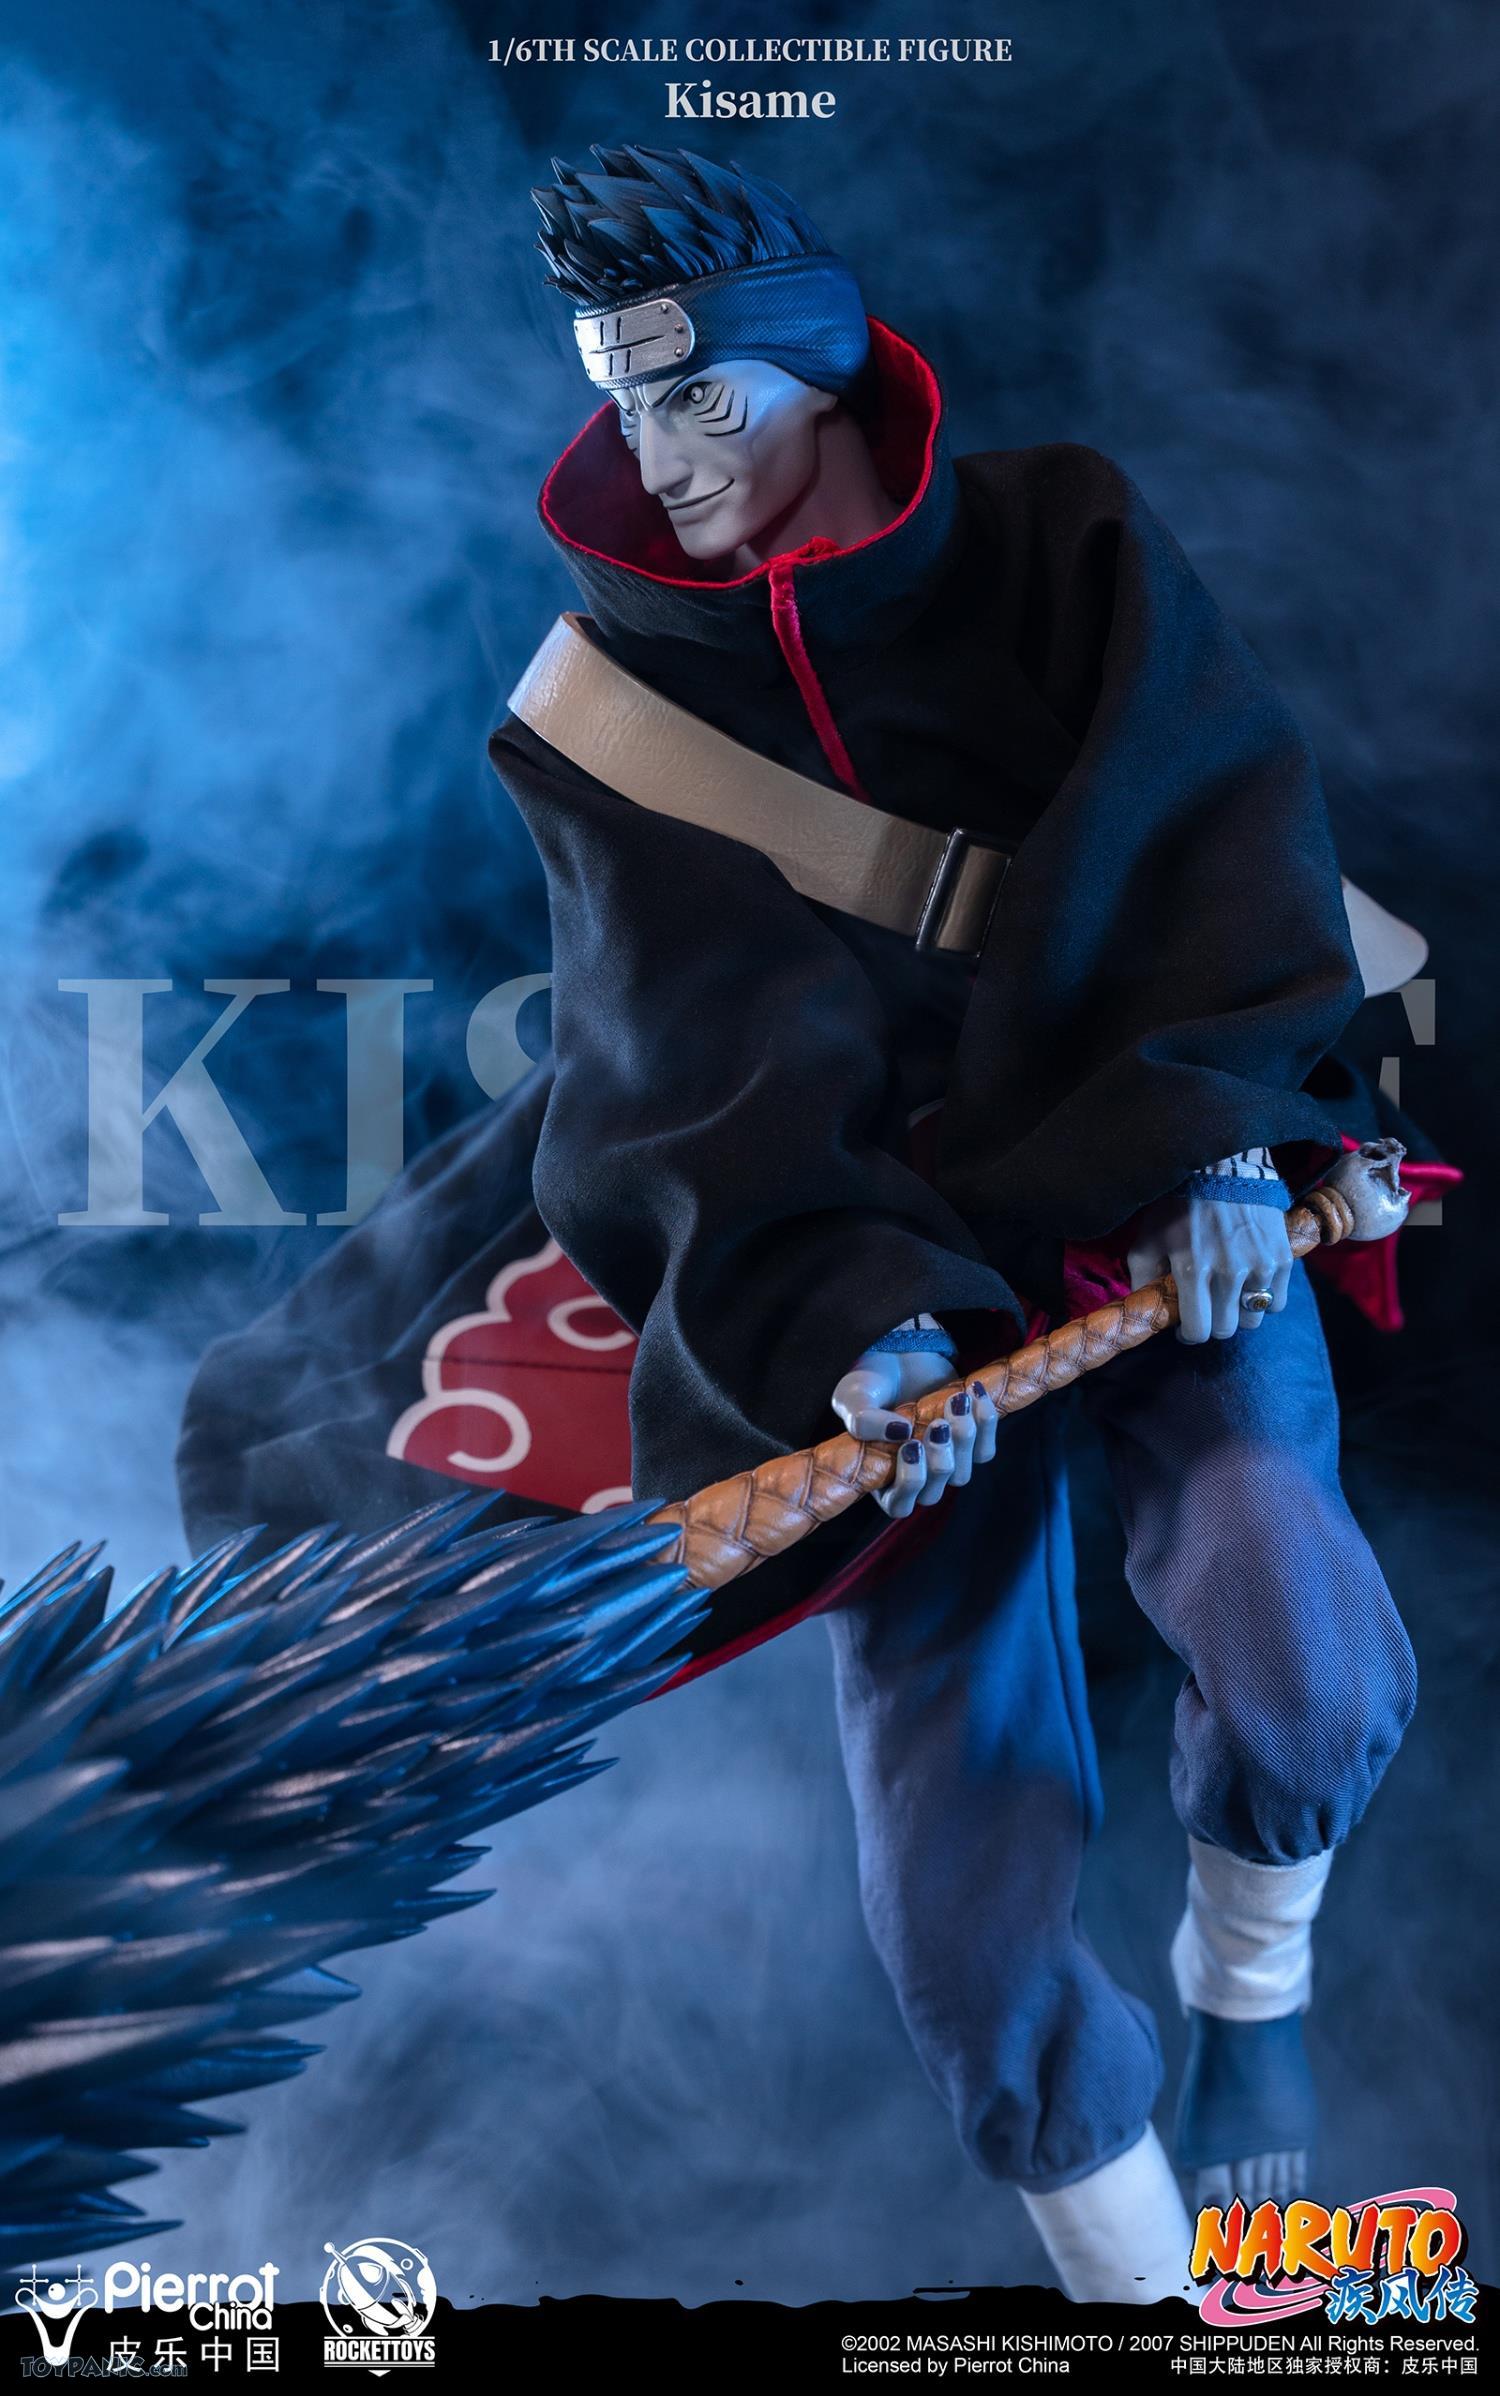 rockettoys - NEW PRODUCT: Rocket Toys ROC-007 1/6 Scale Kisame 221202460436PM_2163868